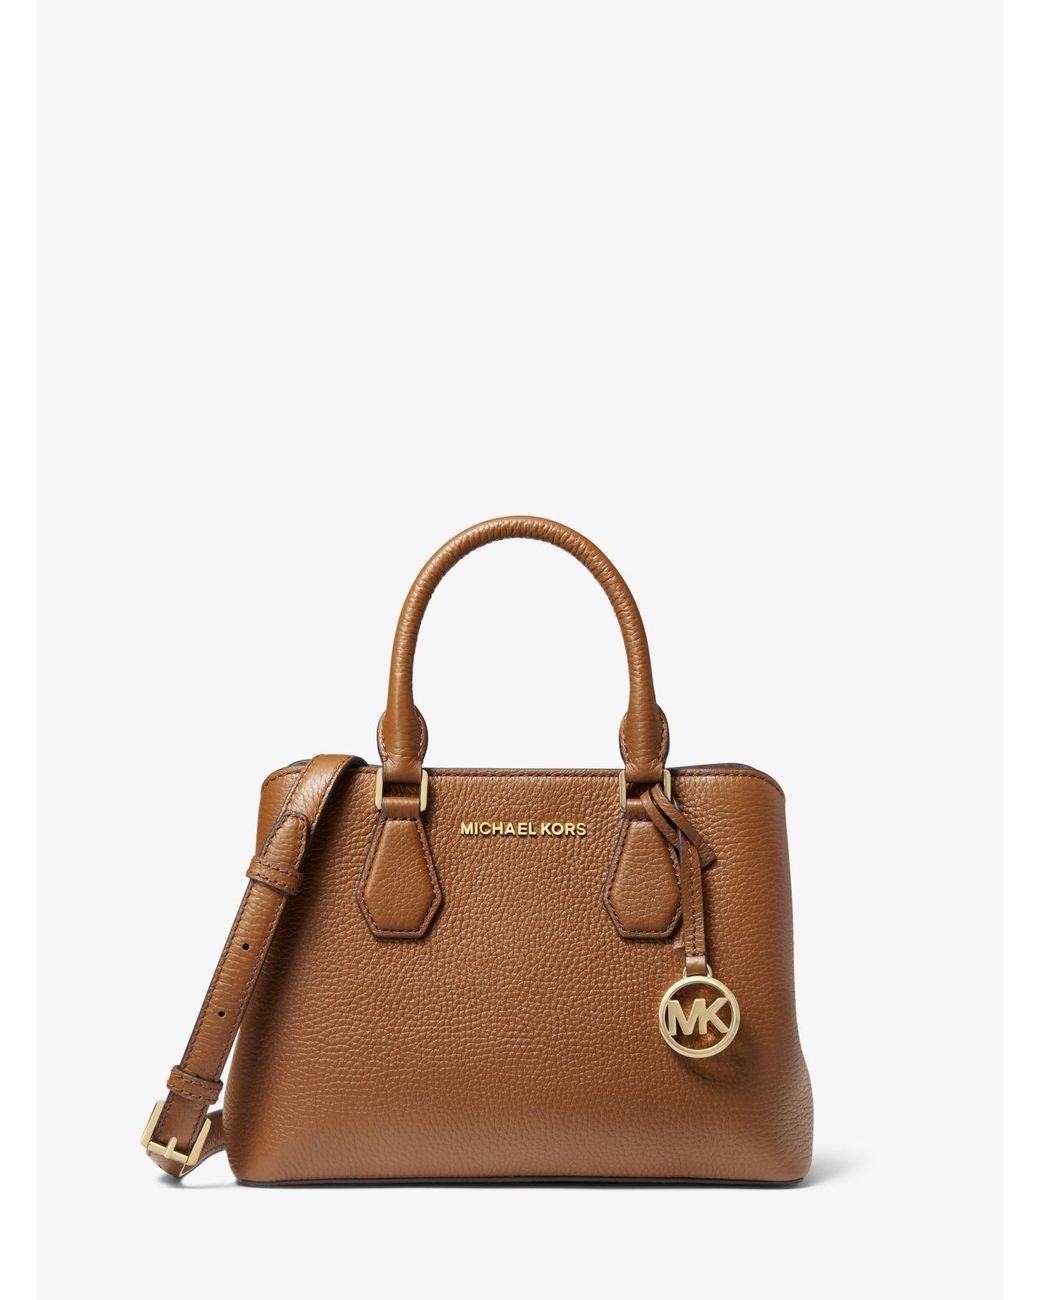 MICHAEL Michael Kors Camille Small Pebbled Leather Satchel in Brown | Lyst